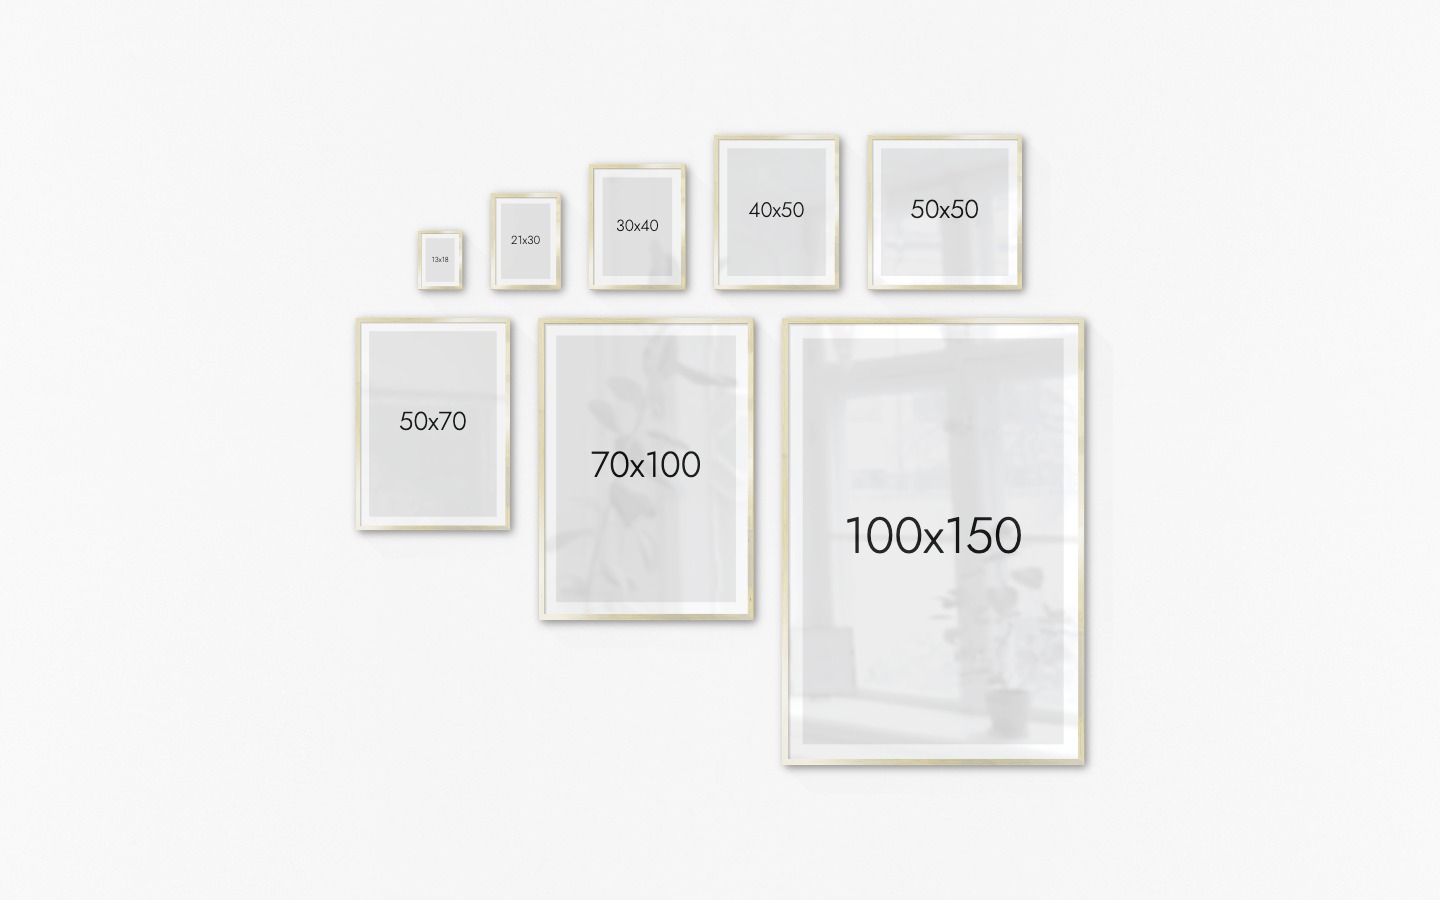 Gallery wall with picture frames in gold in sizes 13x18, 21x30, 30x40, 40x50, 50x50, 50x70, 70x100 and 100x150